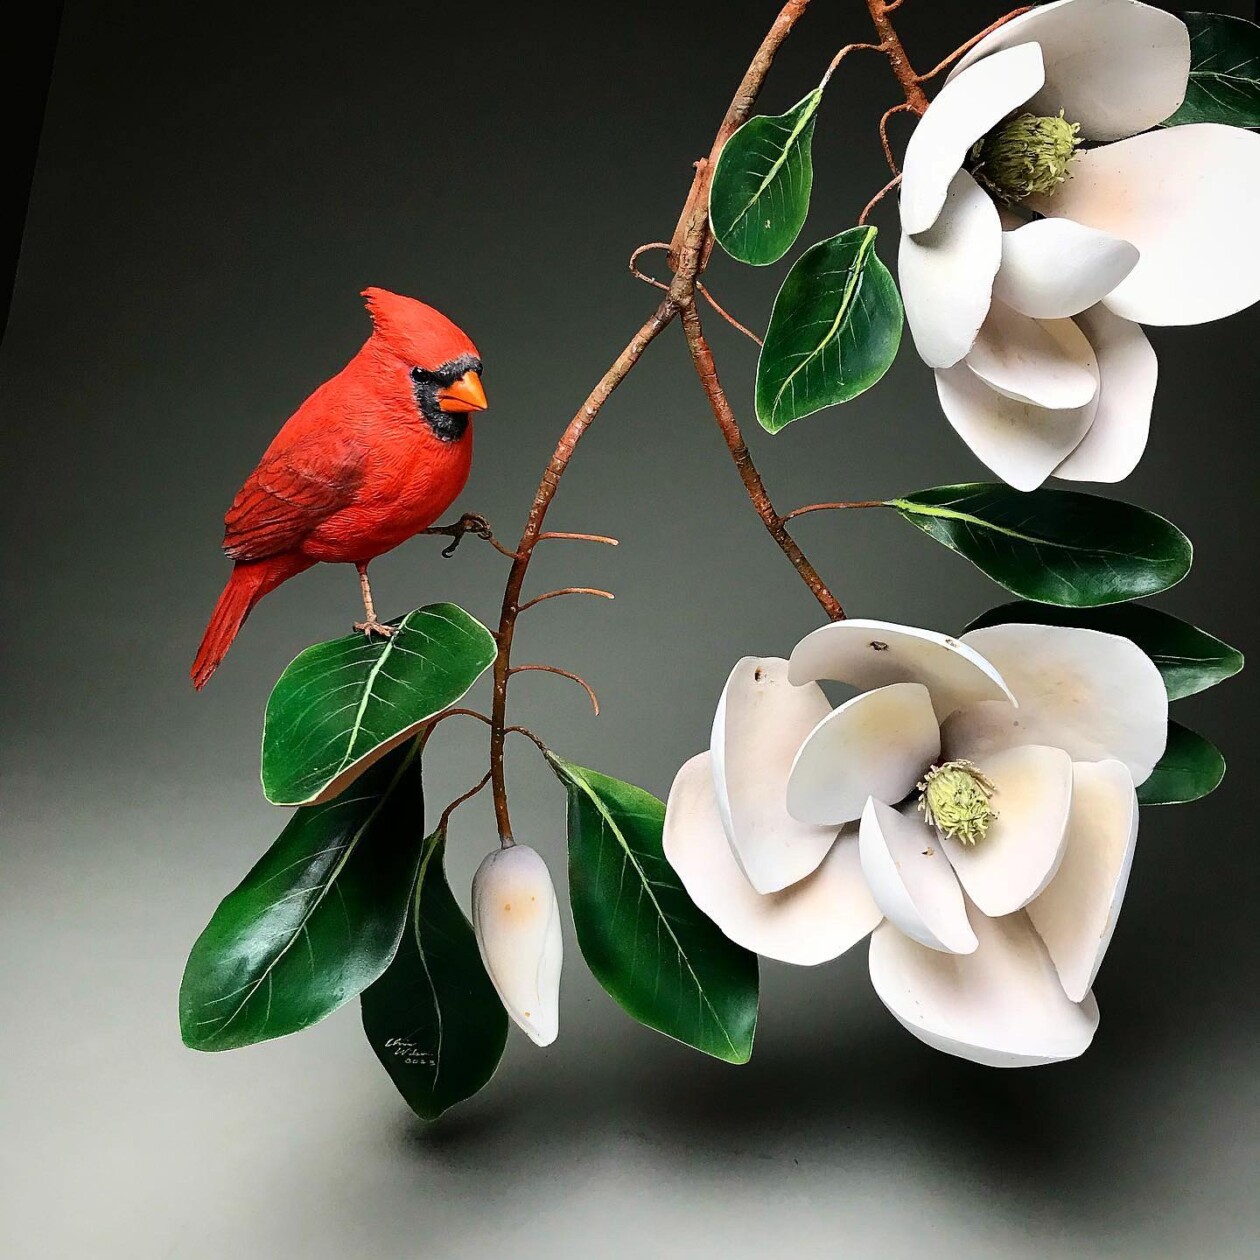 From Branch To Breathtaking, The Art Of Chris Wilson's Wildlife Sculptures (12)